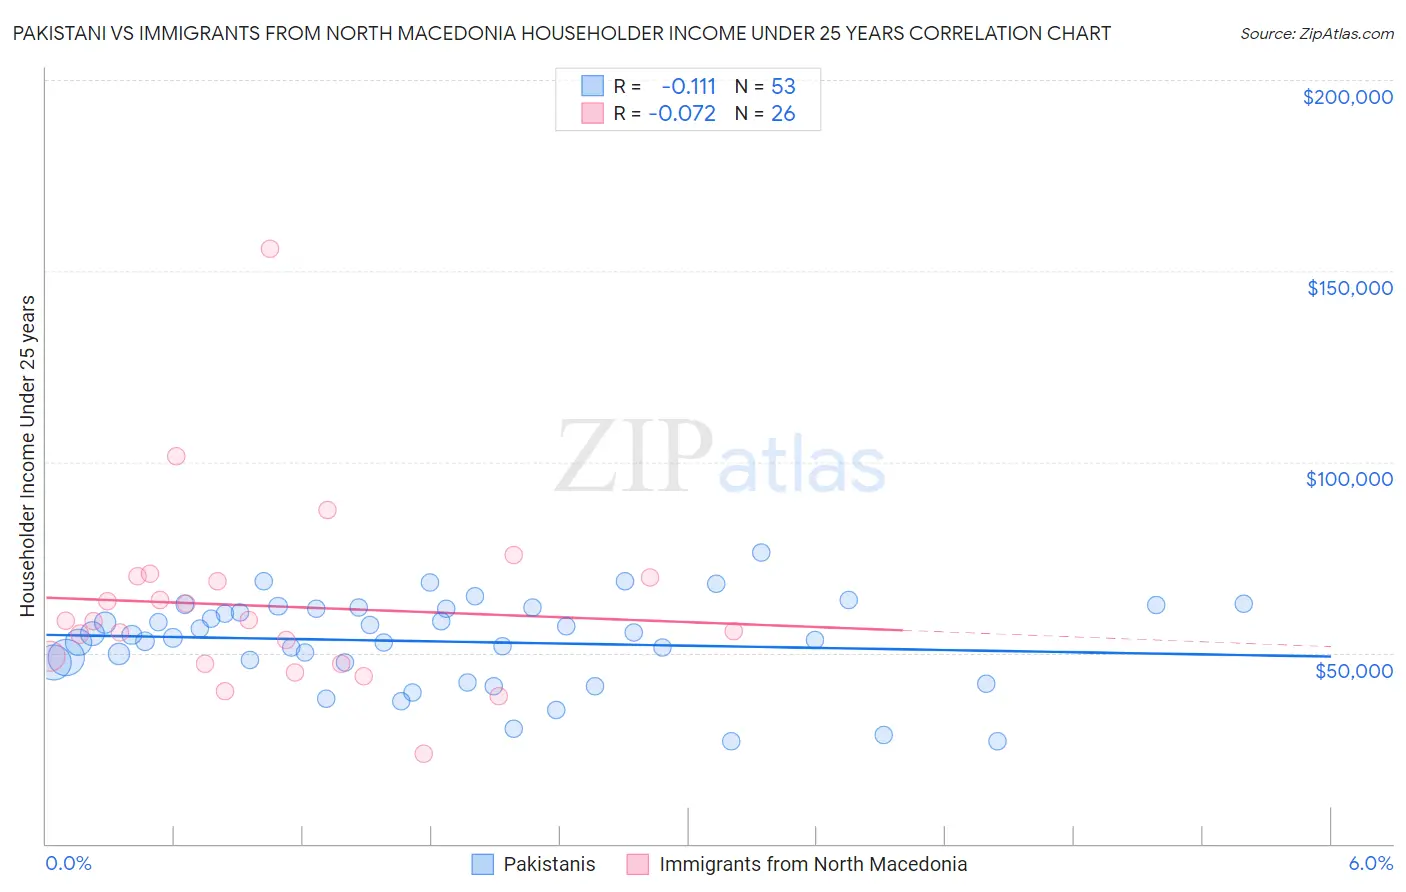 Pakistani vs Immigrants from North Macedonia Householder Income Under 25 years